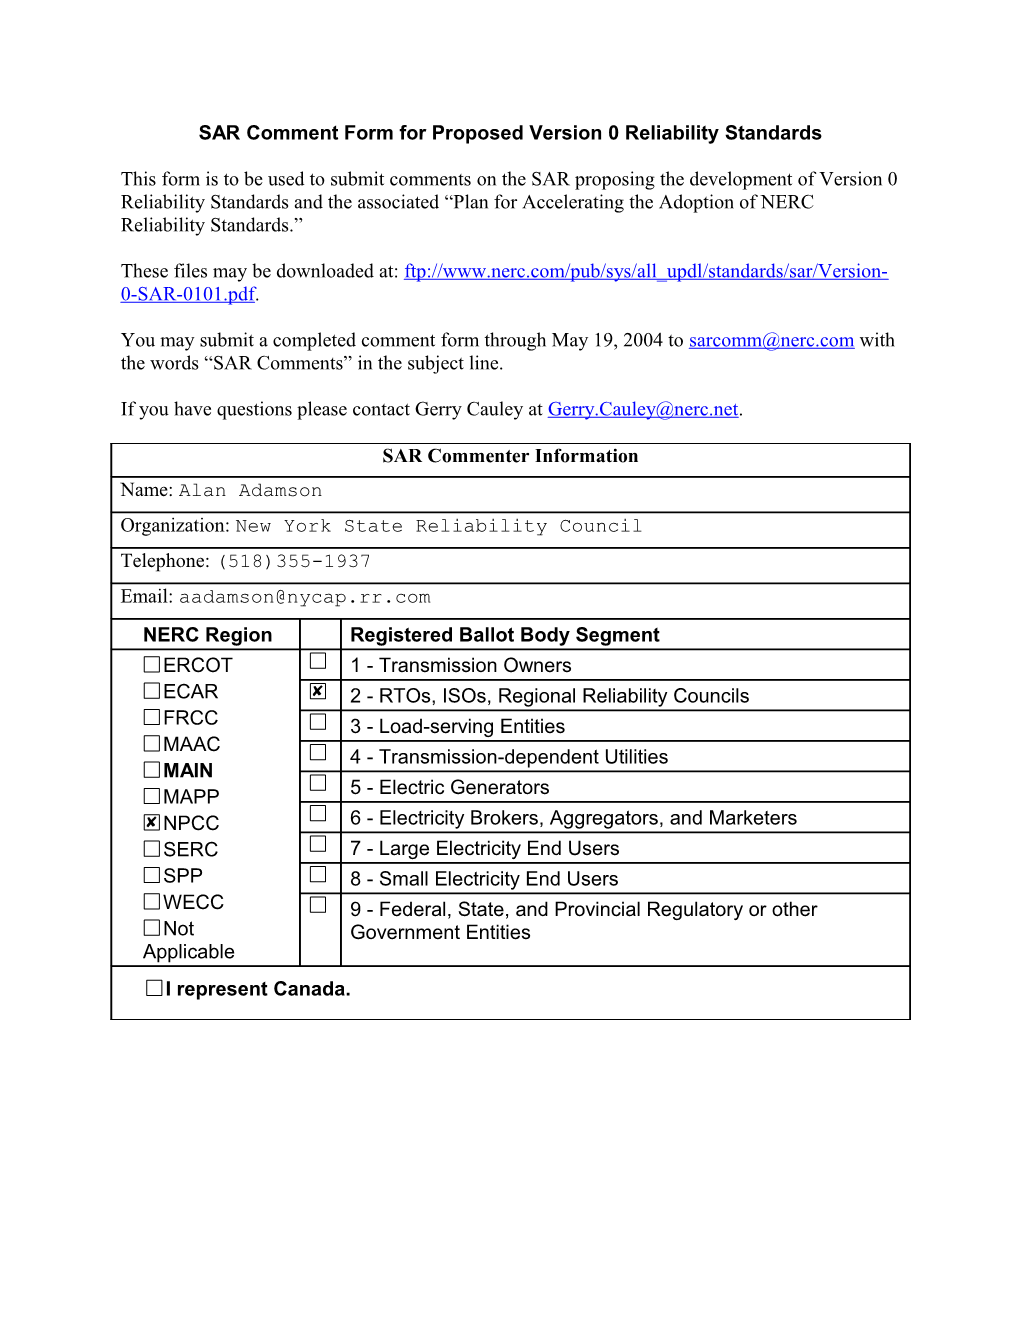 SAR Comment Form for Proposed Version 0 Reliability Standards